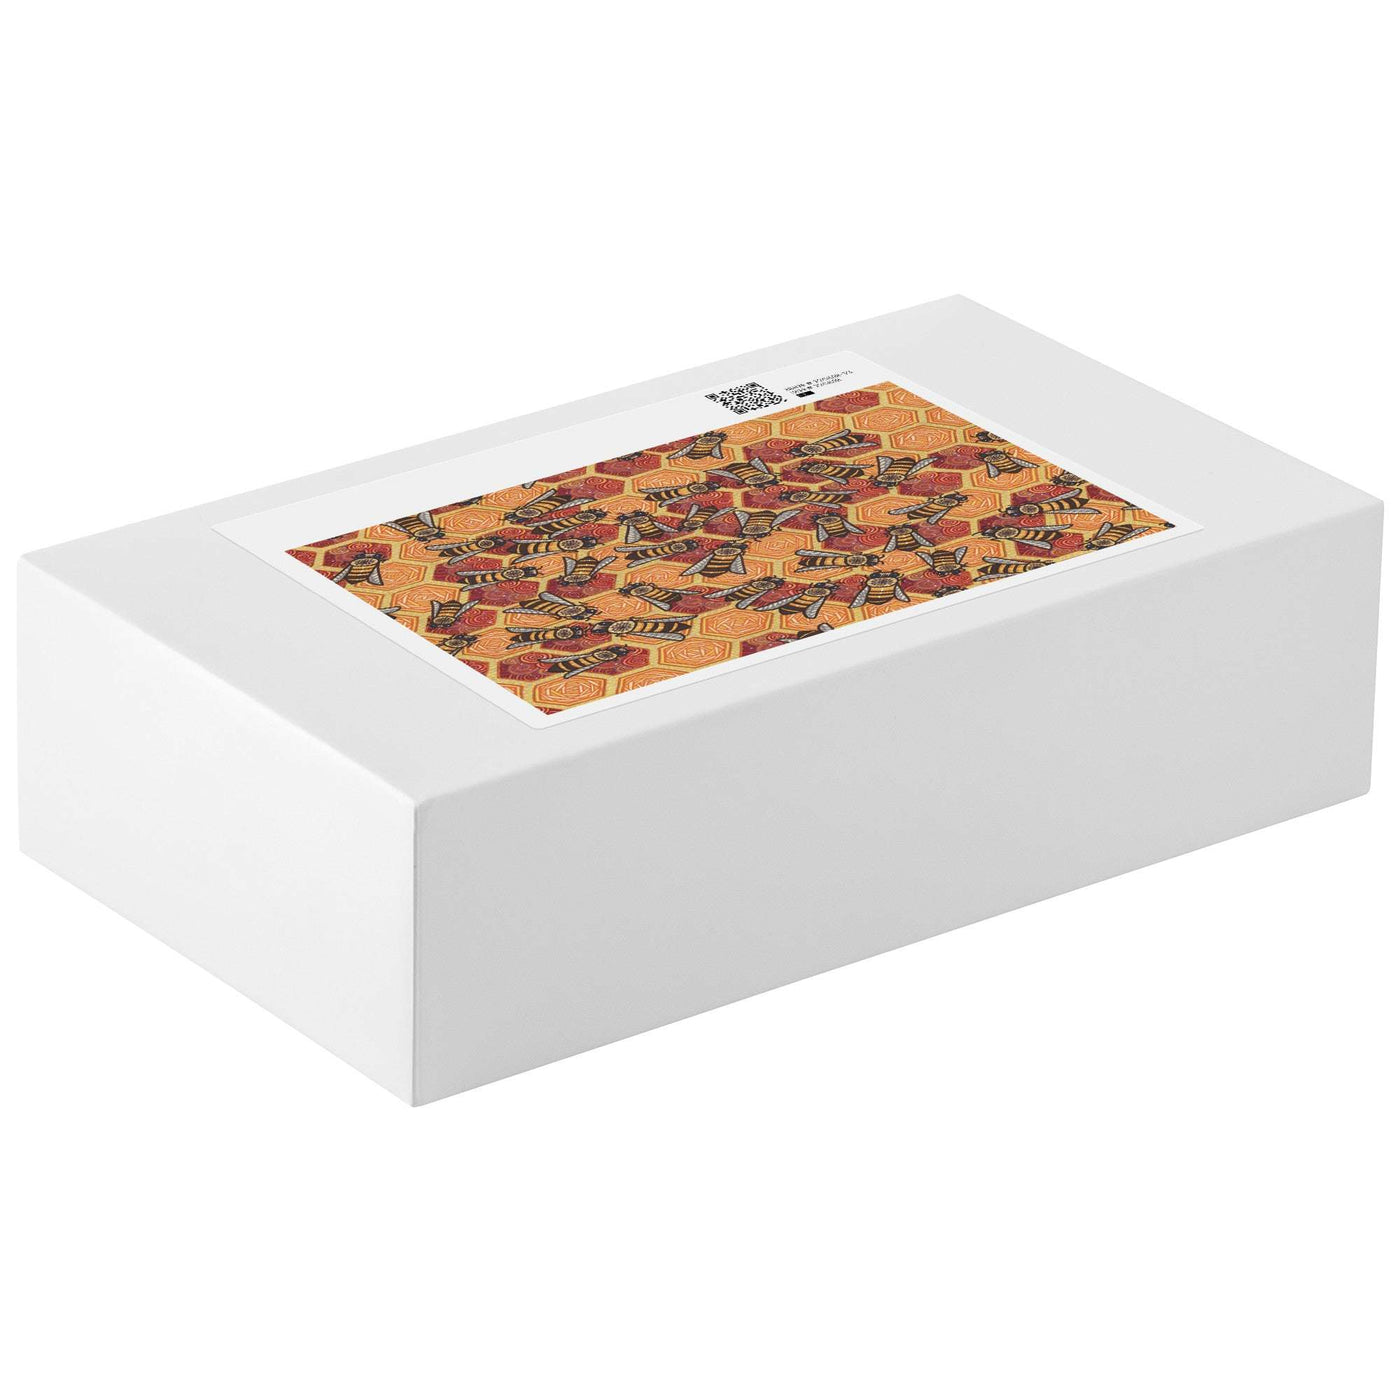 A white rectangular puzzle box with a sticker on the lid, showcasing the Honeycomb Harmony Puzzle design.